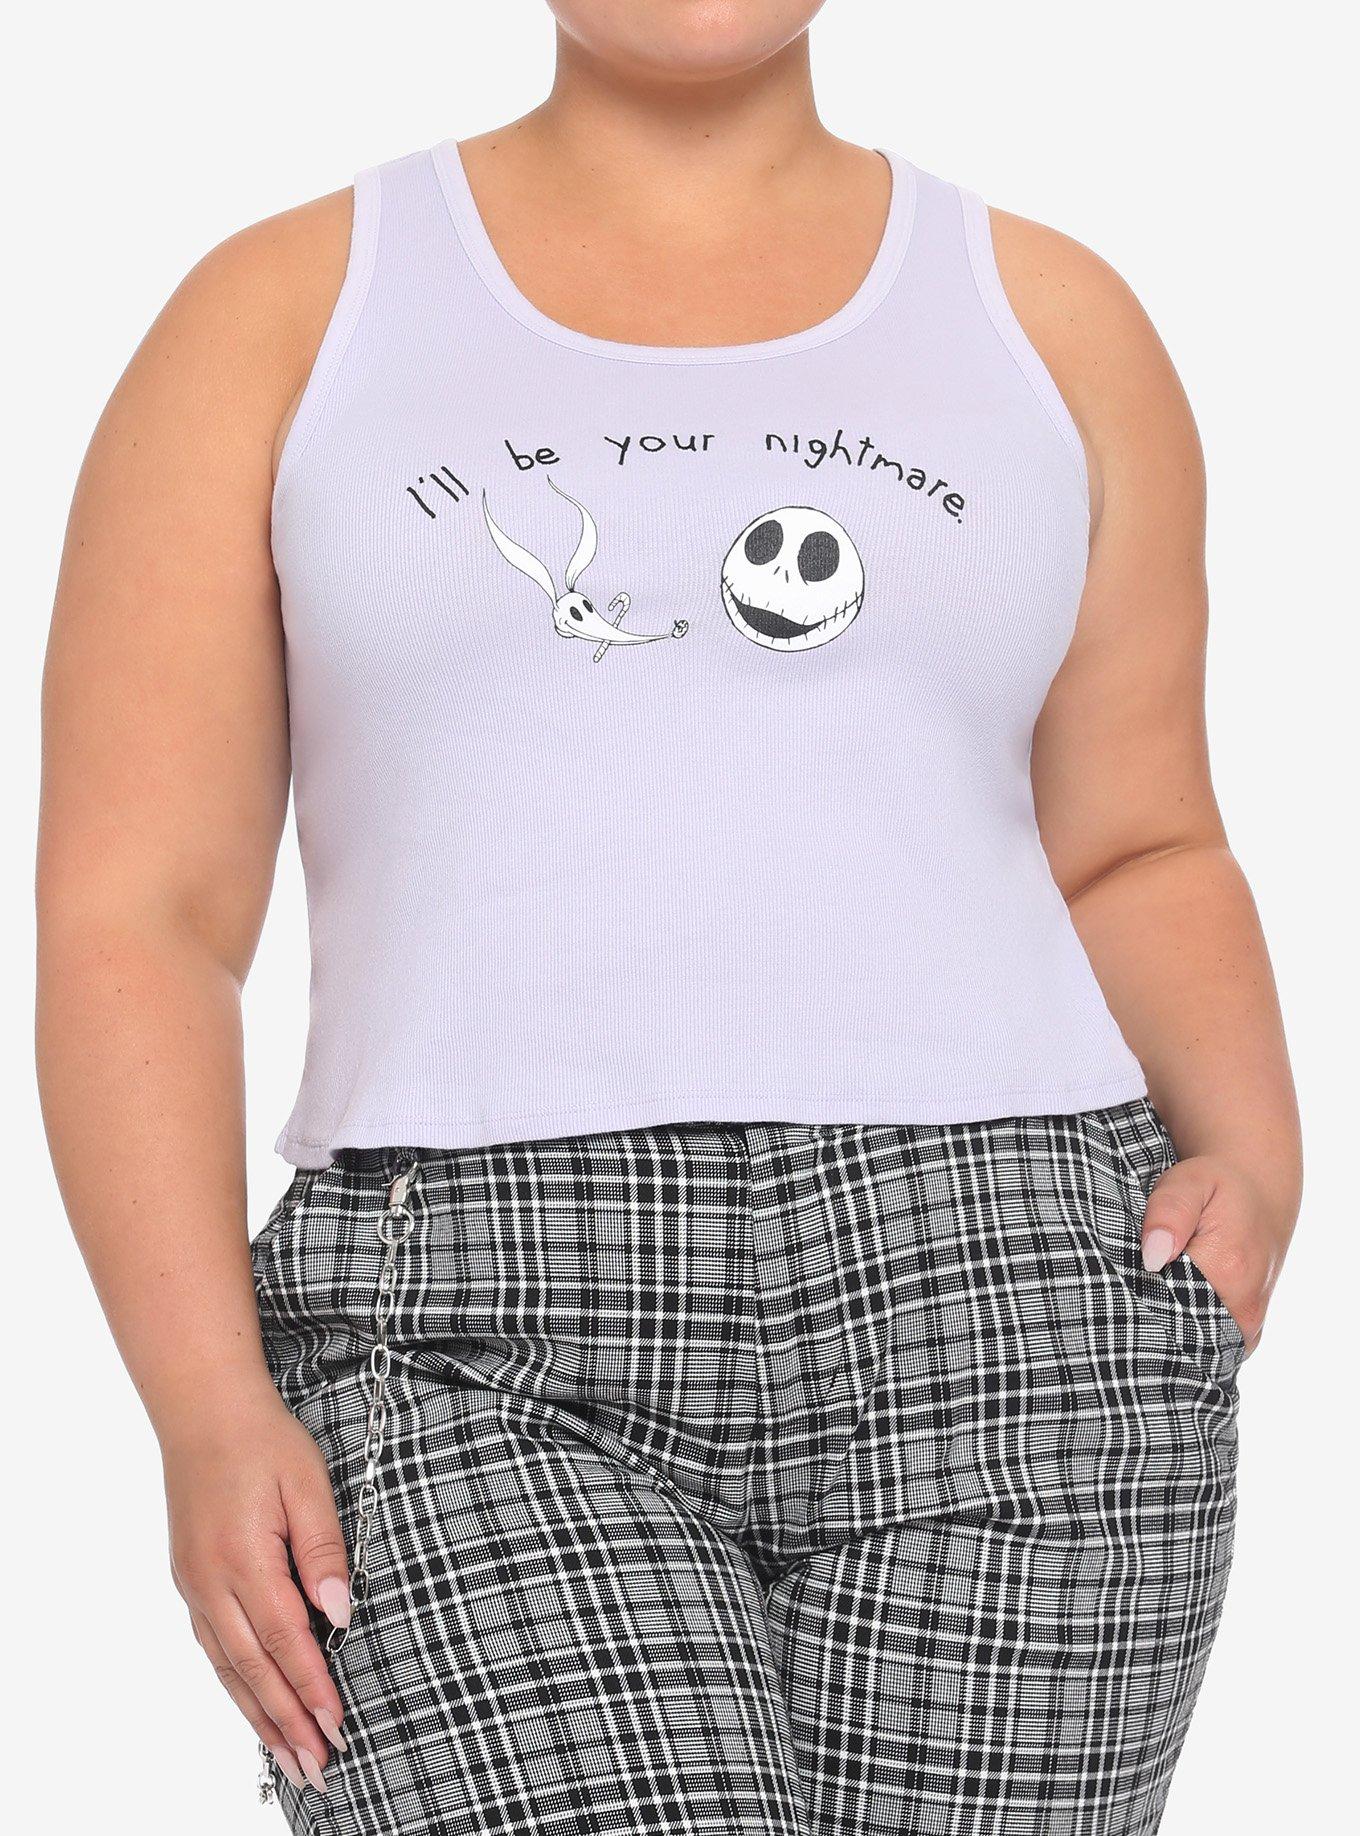 The Nightmare Before Christmas Be Your Nightmare Ribbed Girls Tank Top Plus Size, MULTI, hi-res